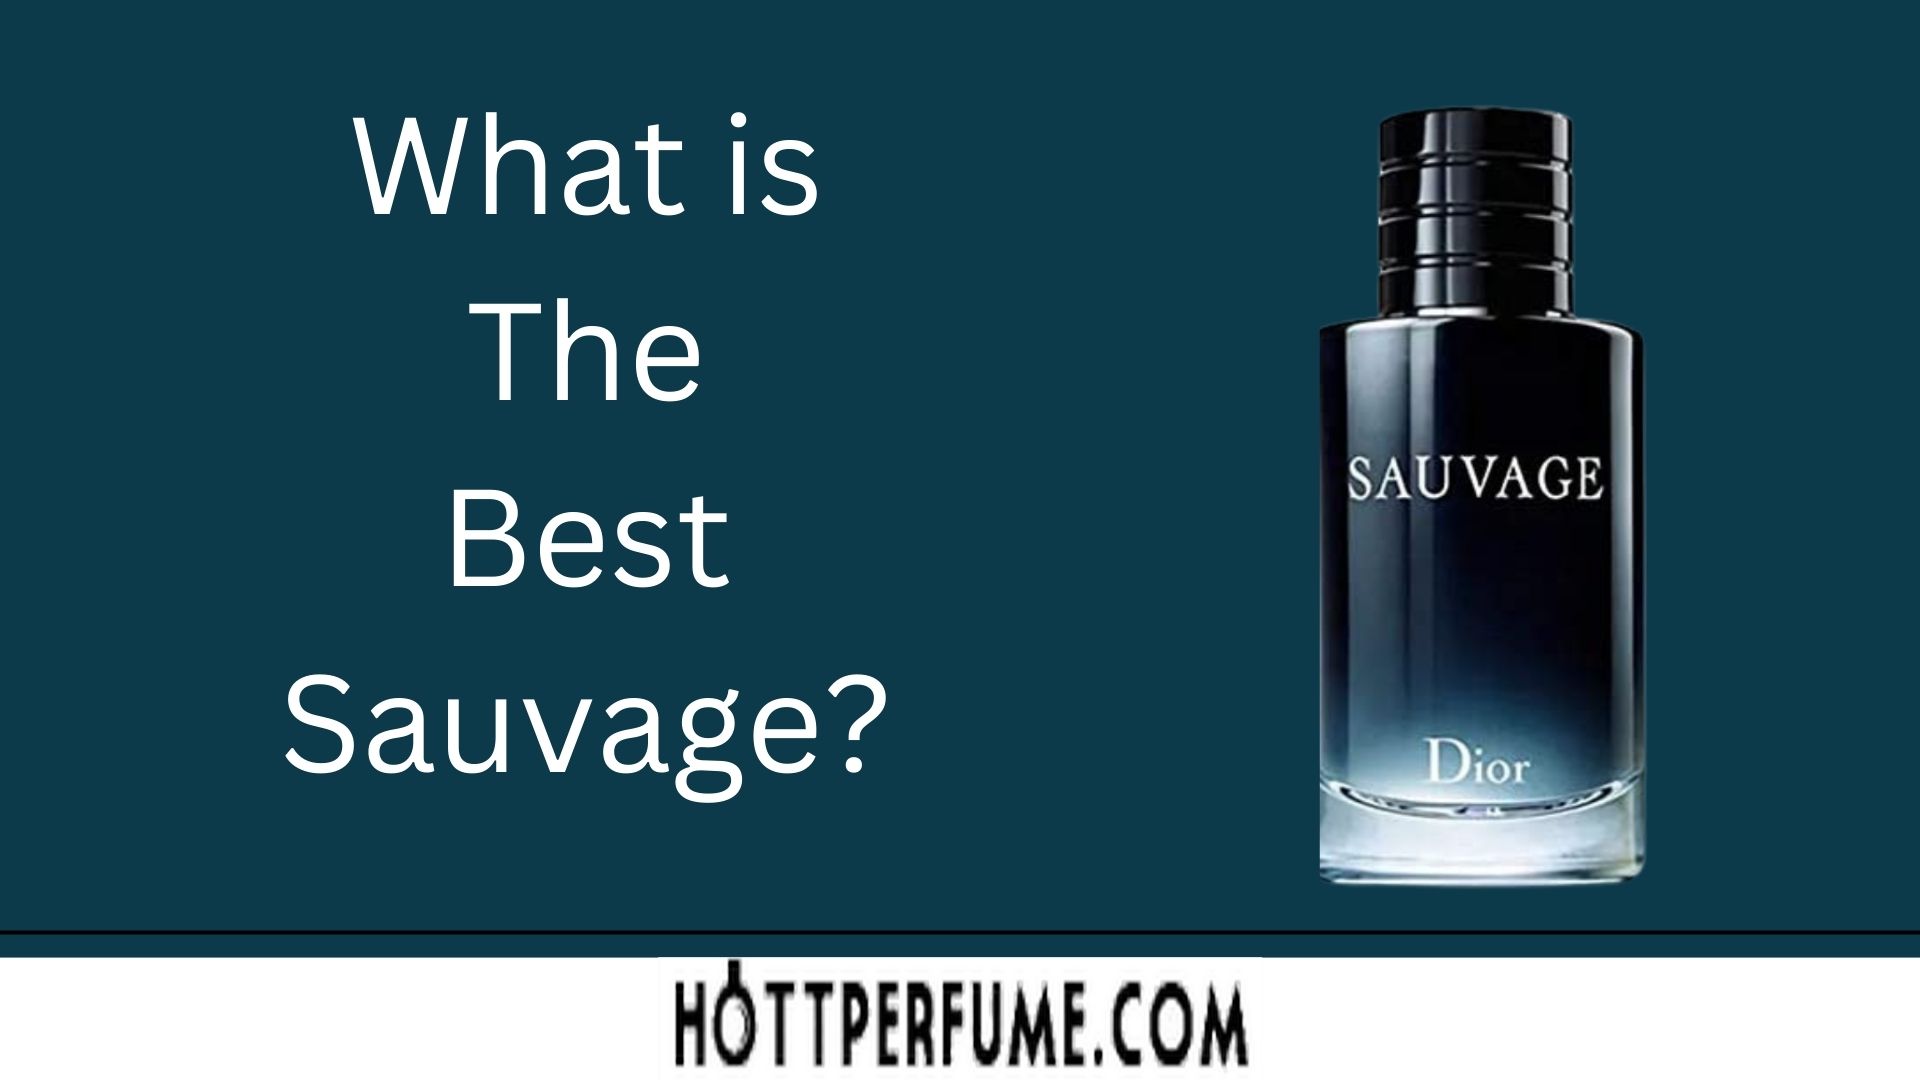 What is The Best Sauvage